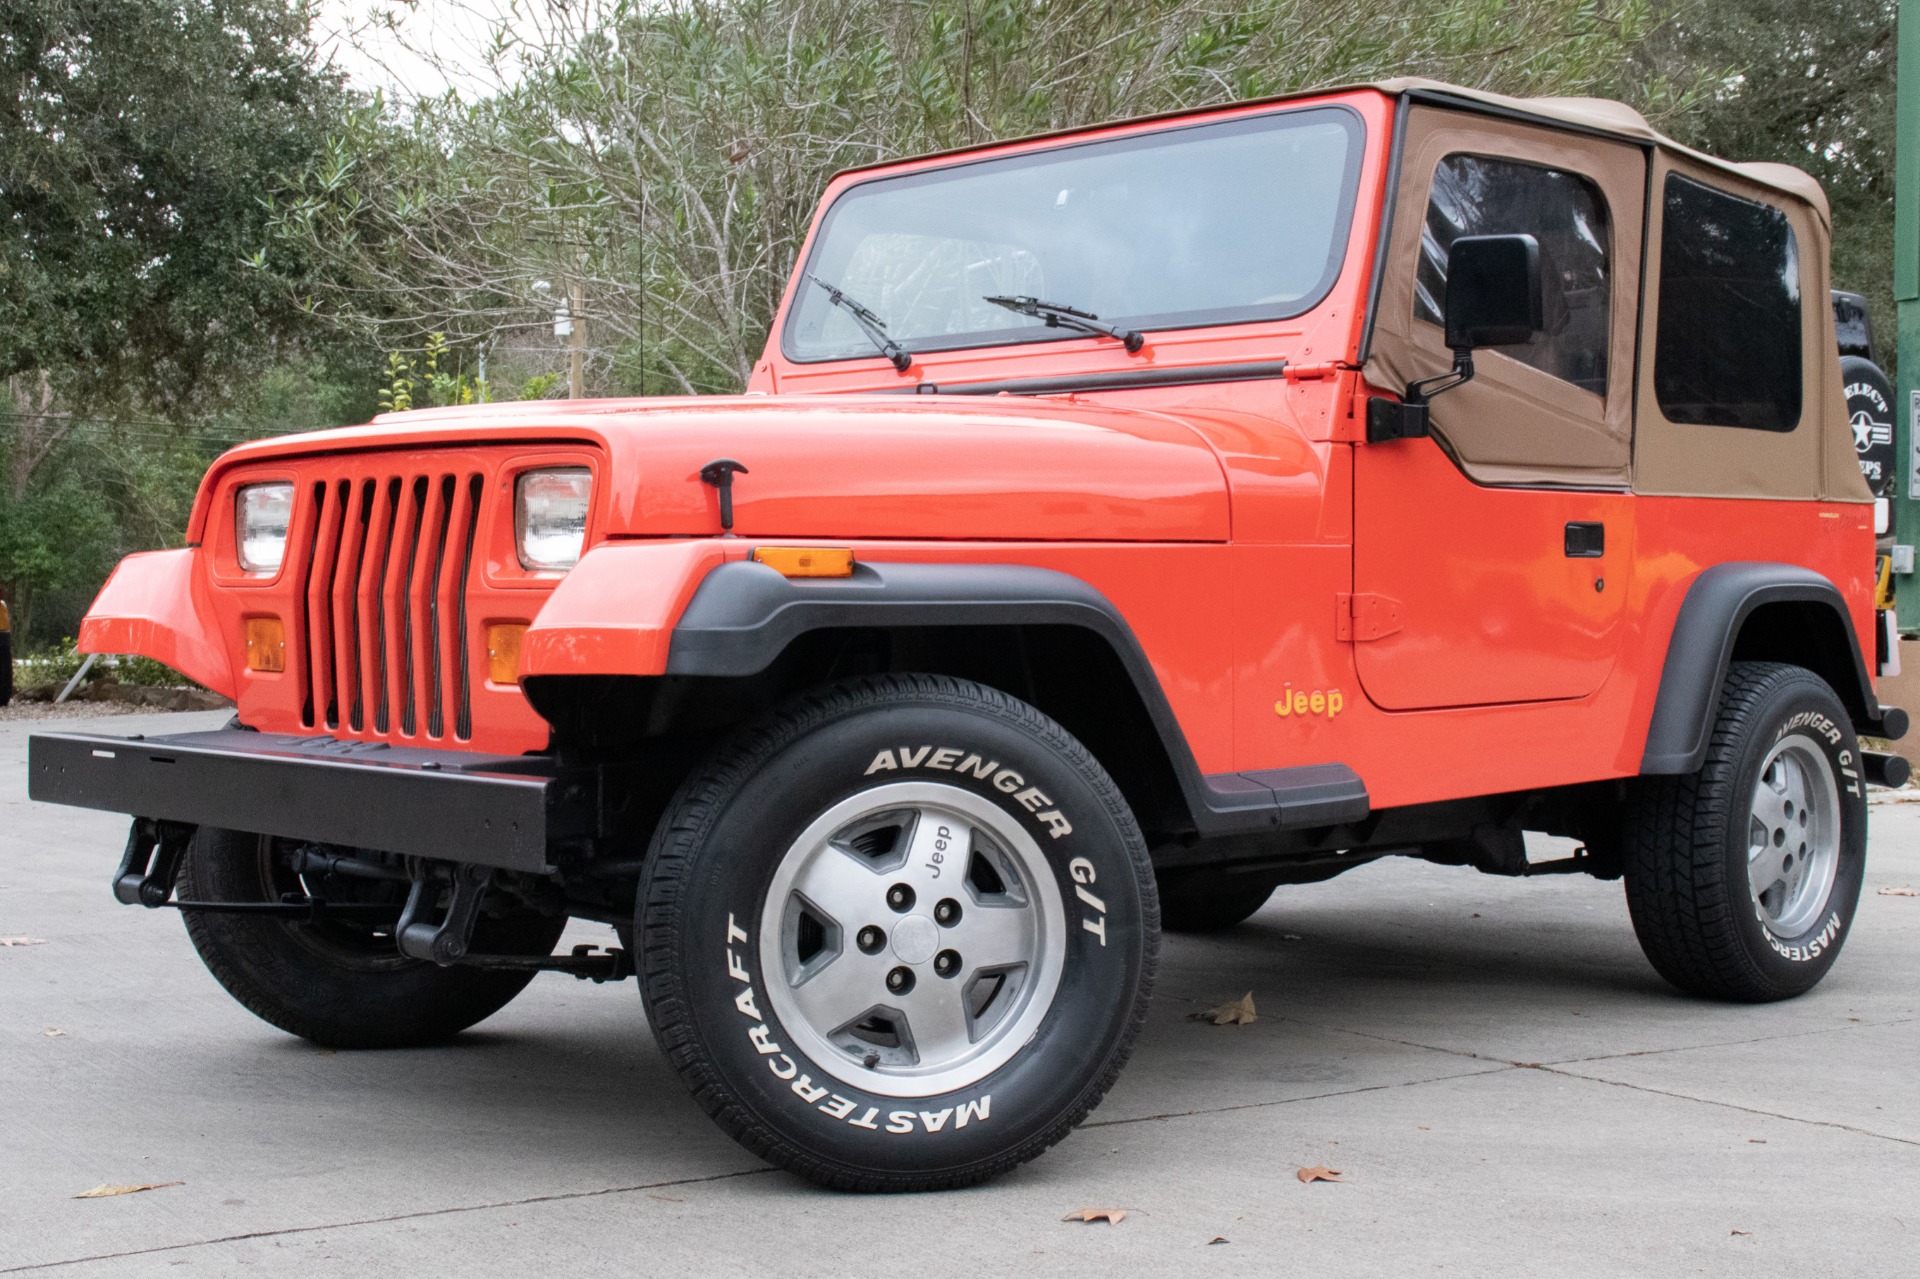 Used 1995 Jeep Wrangler S For Sale ($10,995) | Select Jeeps Inc. Stock  #213561